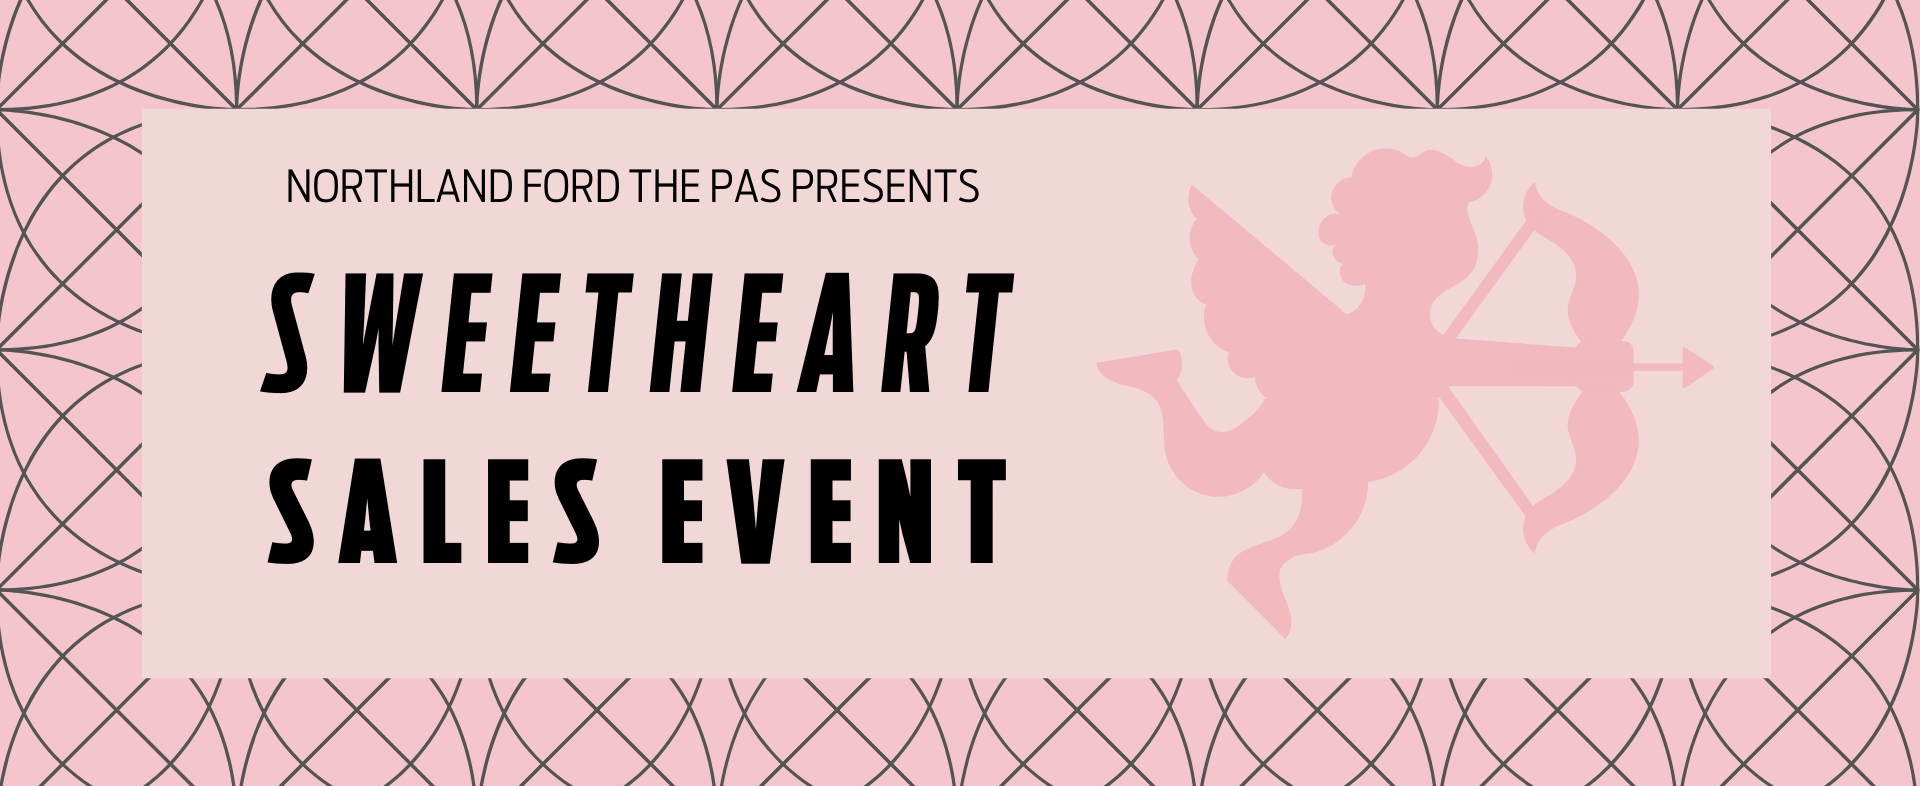 Sweetheart sales event